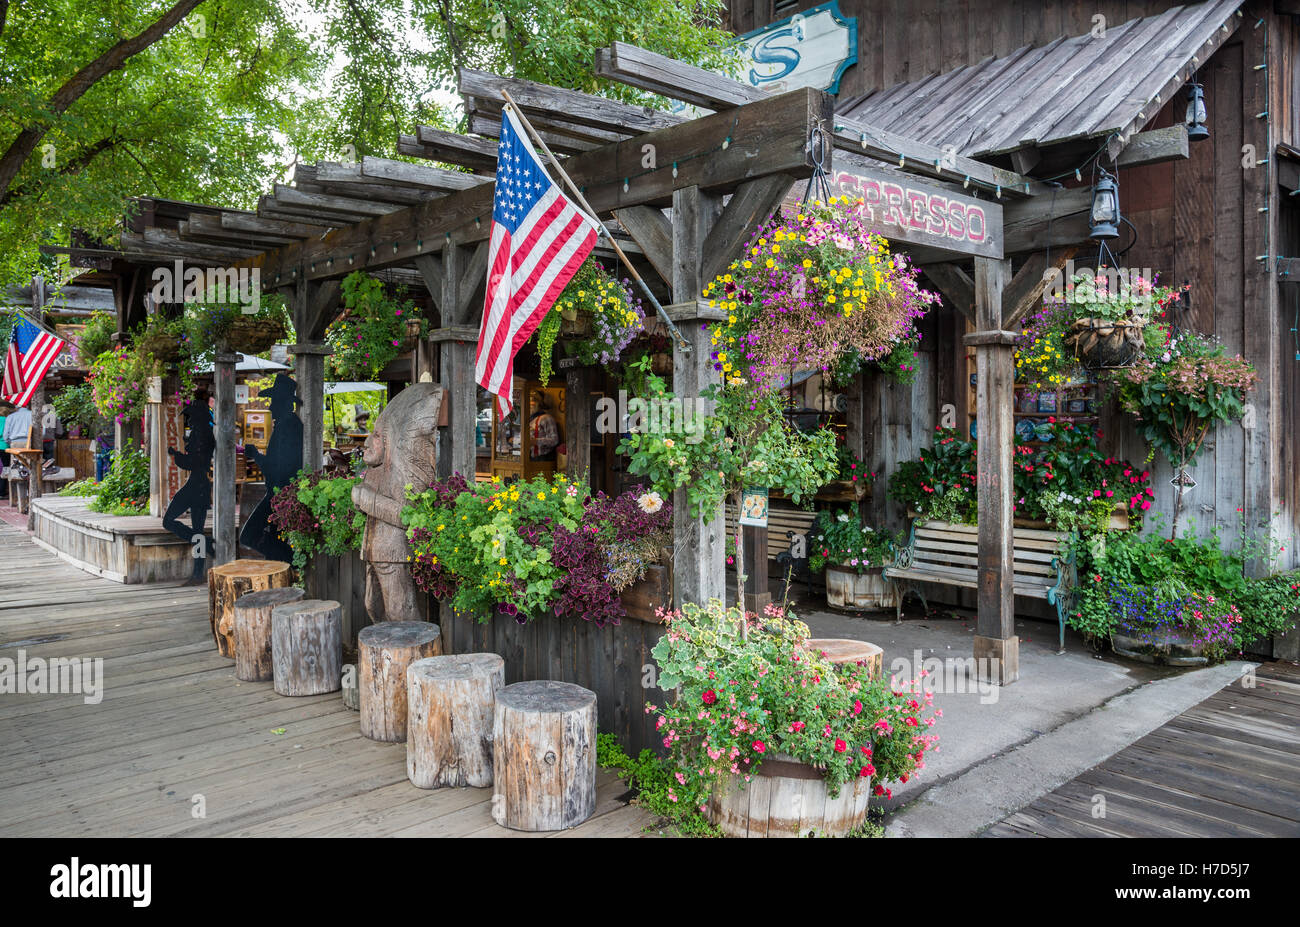 An American flag in front of a sweet shop in small town Winthrop, Washington, USA. Stock Photo